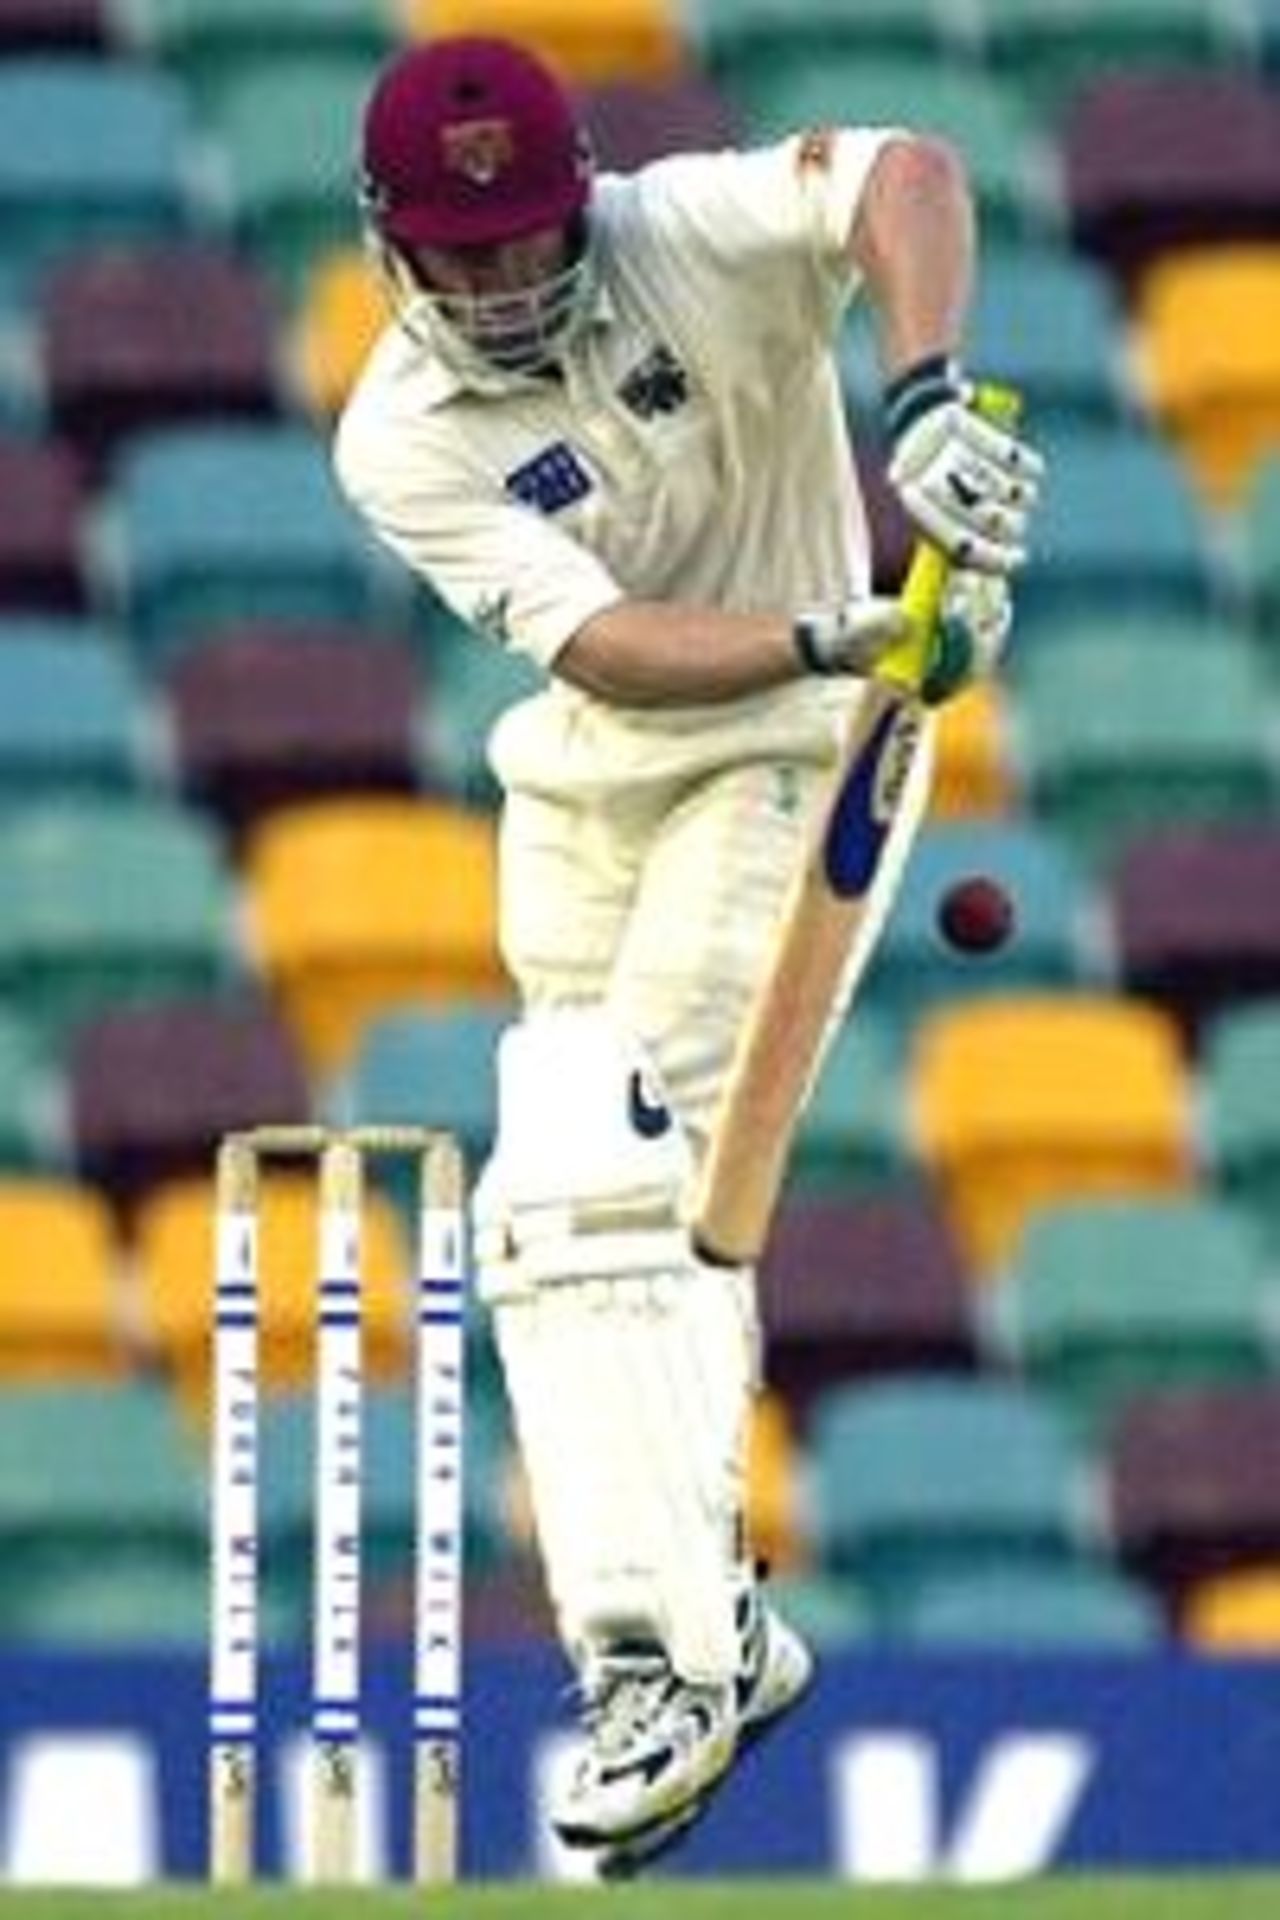 Clinton Perren of the Bulls in action during the last session on day four of the Pura Cup Final between the Queensland Bulls and the Victoria Bushrangers held at the Gabba, Brisbane, Australia.